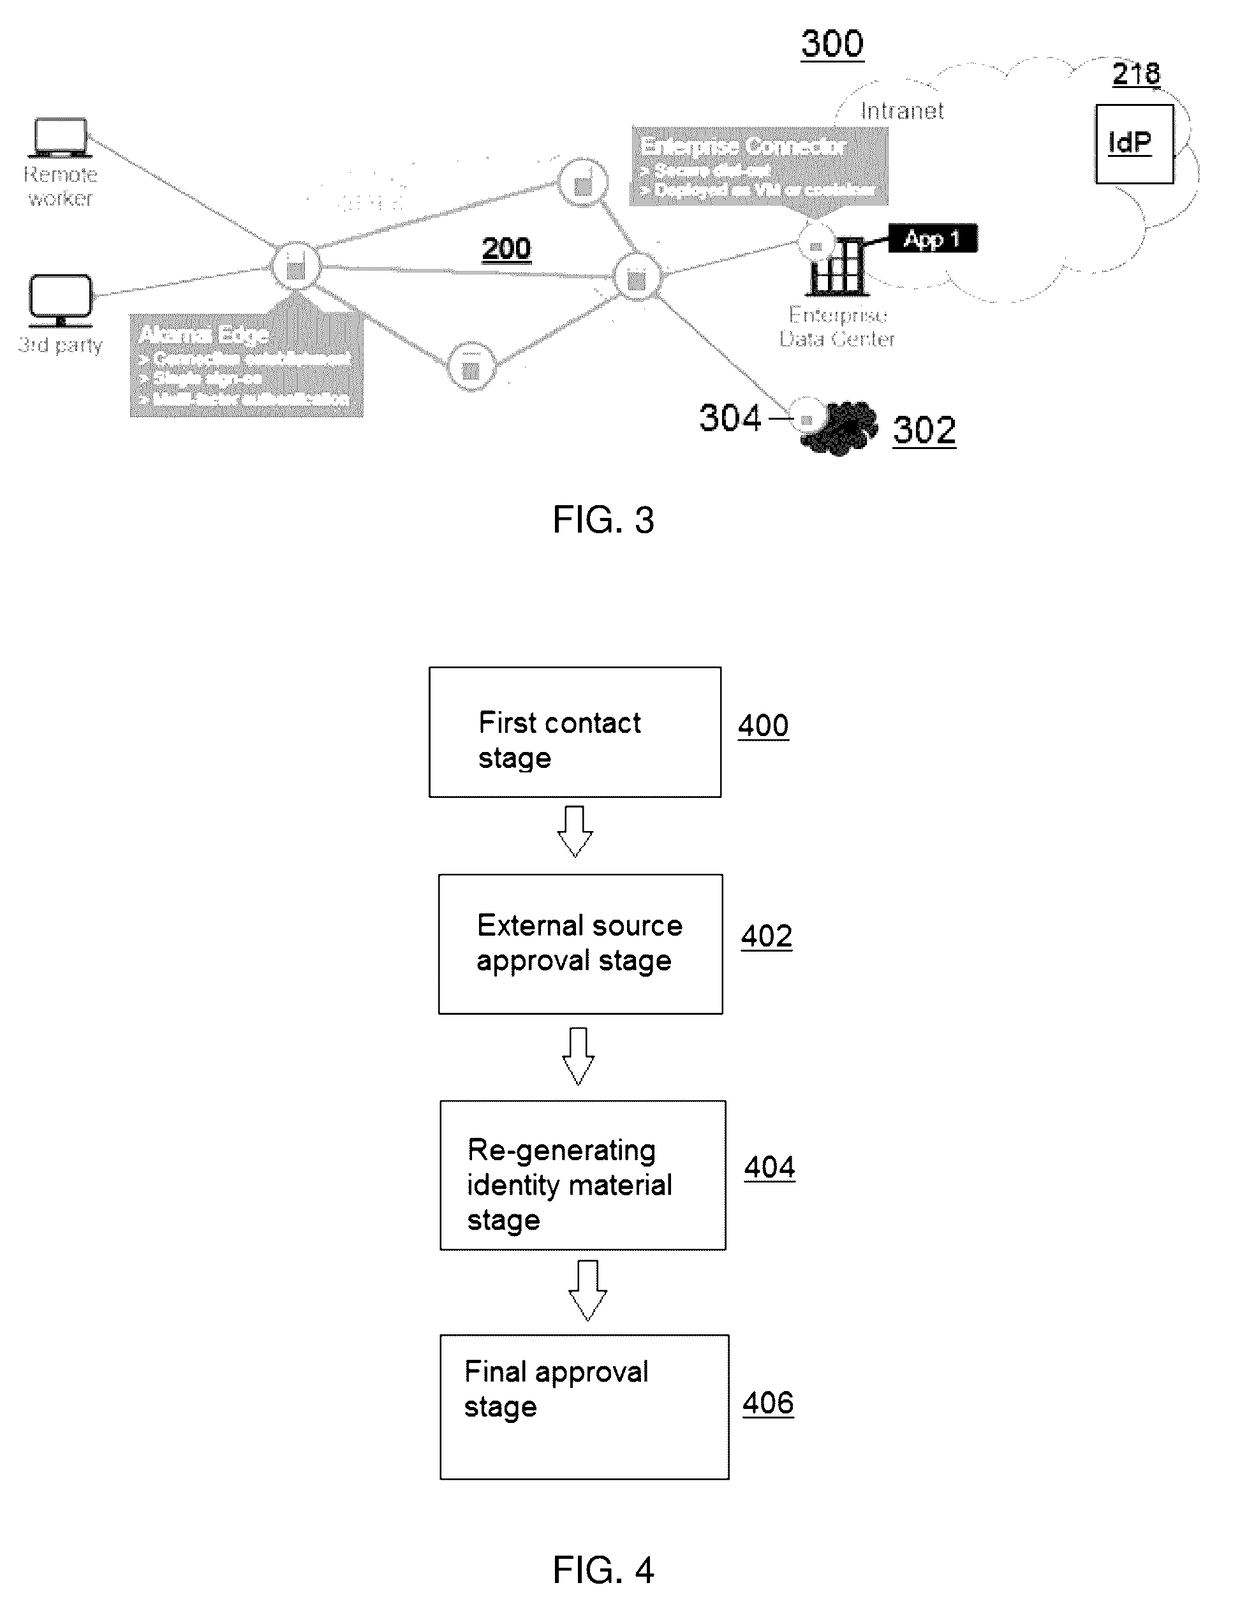 Uniquely identifying and securely communicating with an appliance in an uncontrolled network